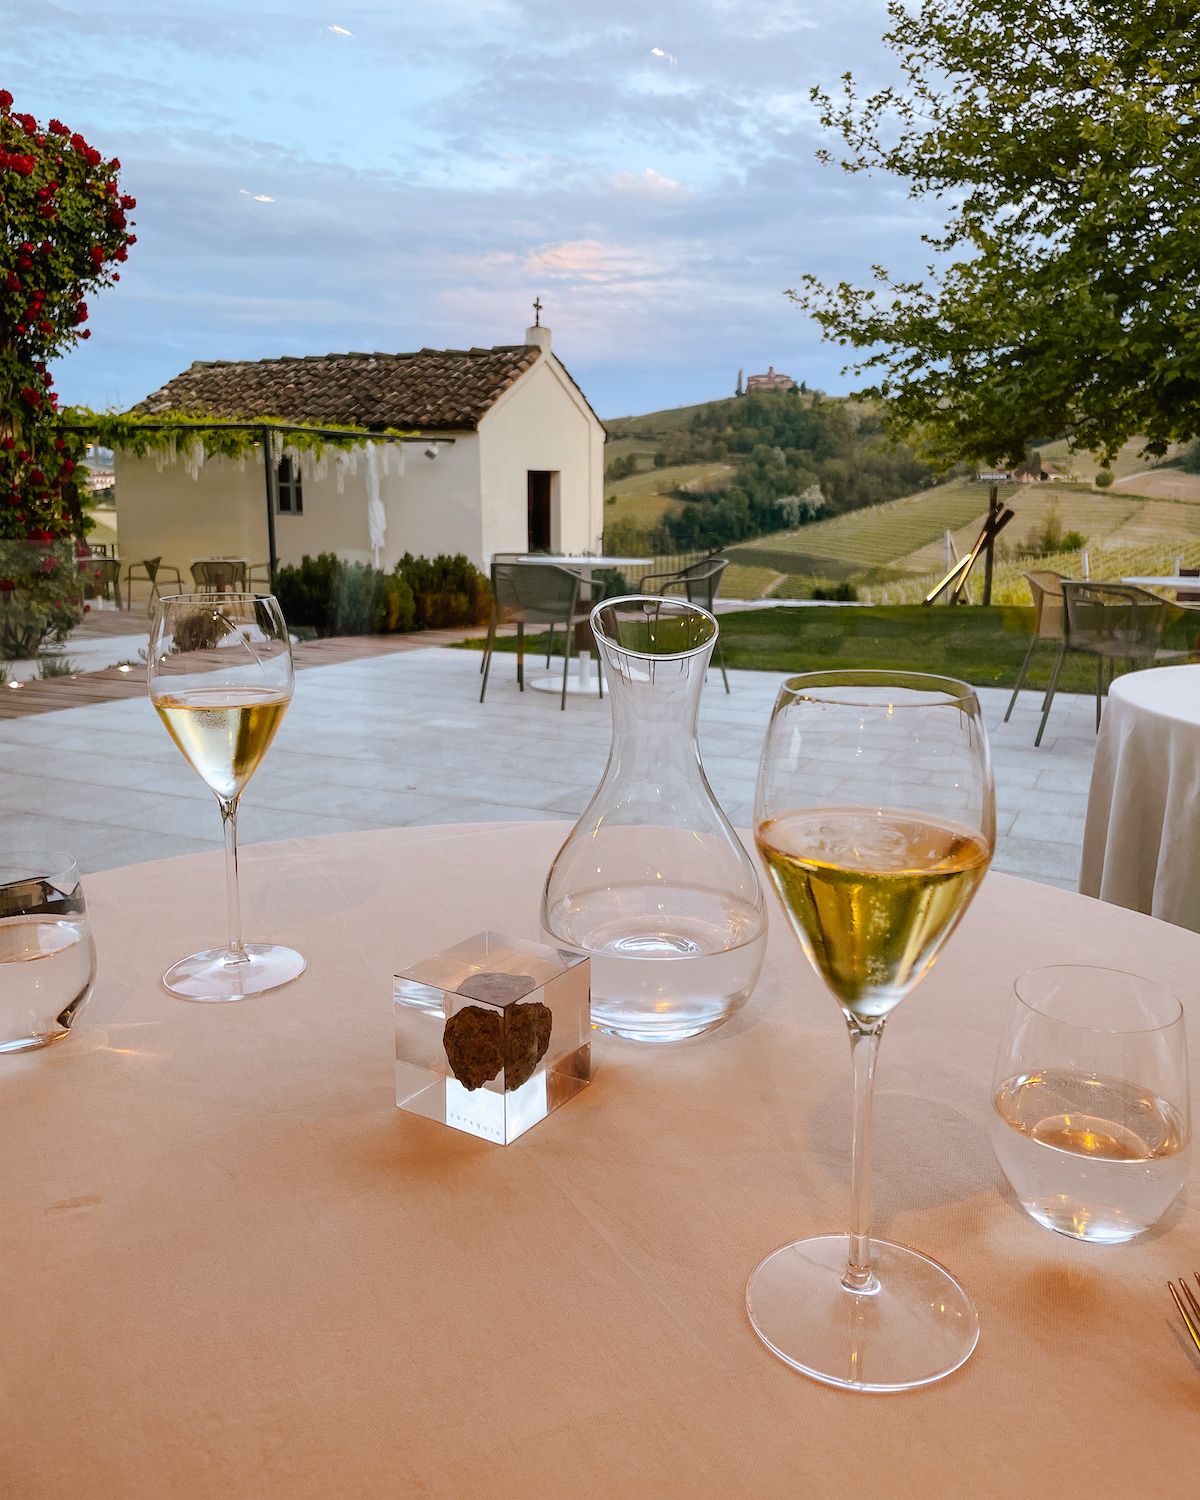 Two wine glasses with prosecco overlooking a small white church and Barolo vineyards